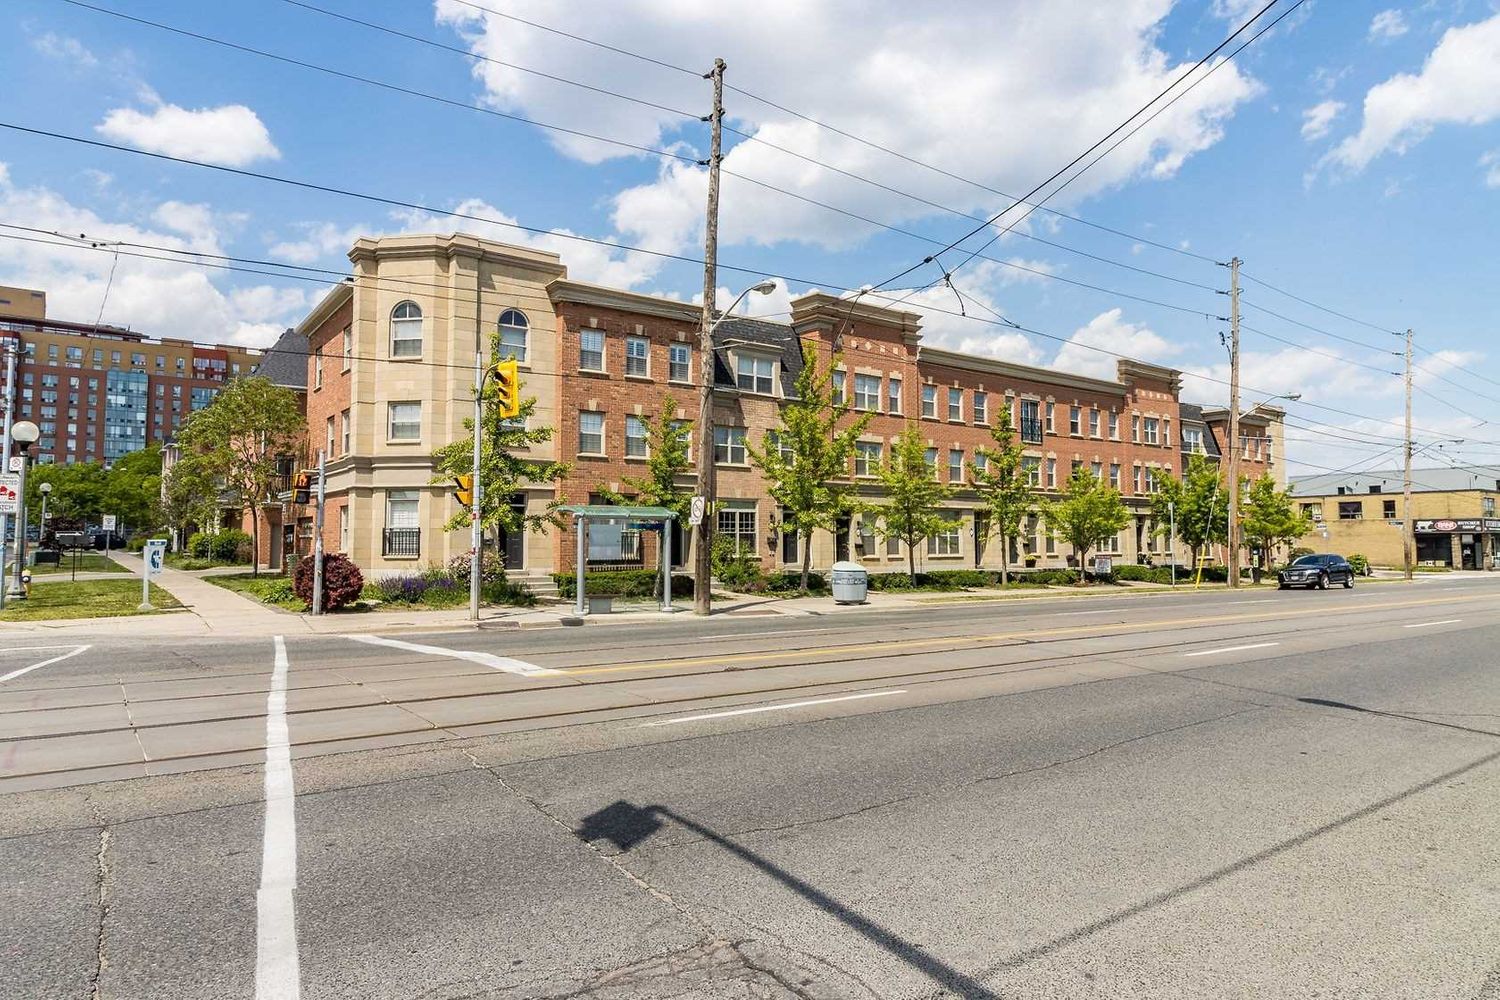 3000-3032 Lake Shore Boulevard W. Parkside Townhomes is located in  Etobicoke, Toronto - image #1 of 2